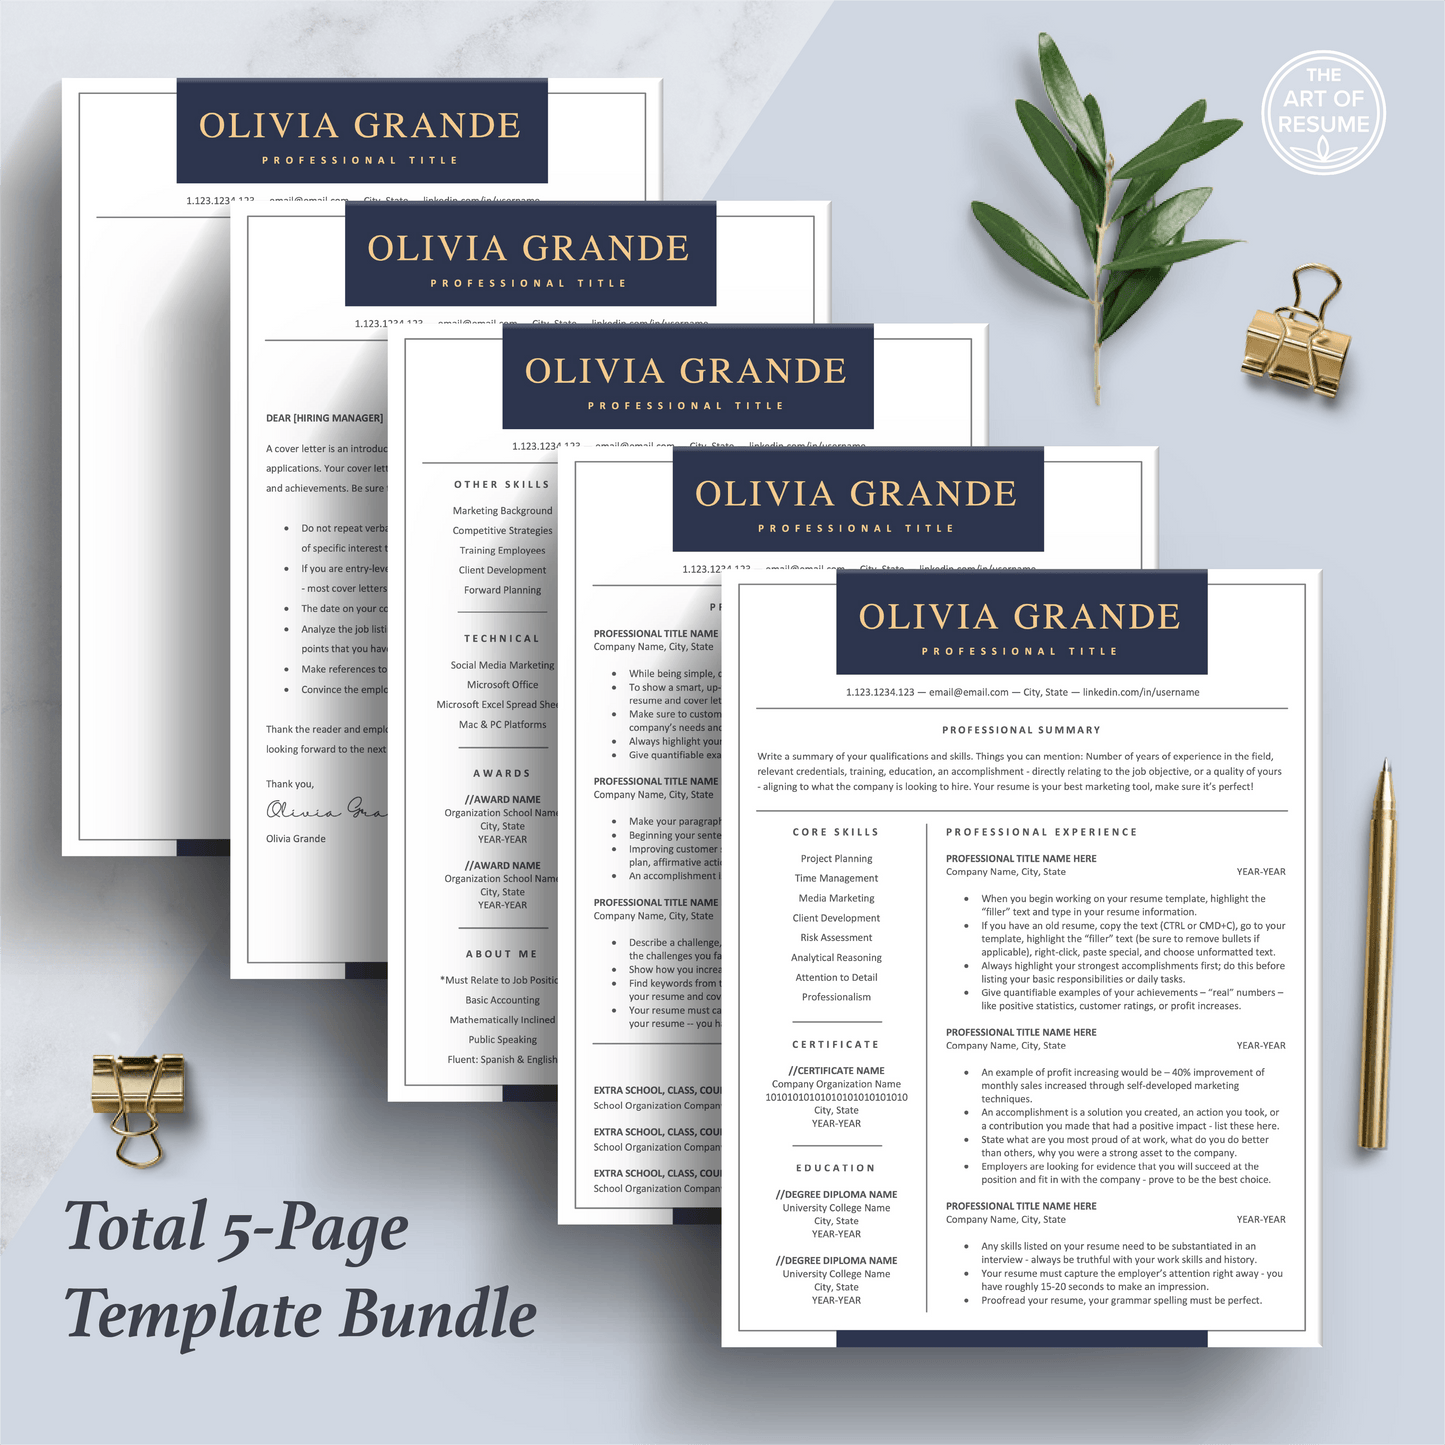 The Art of Resume Templates | Professional Navy Resume CV Design Bundle including matching cover letter and reference page